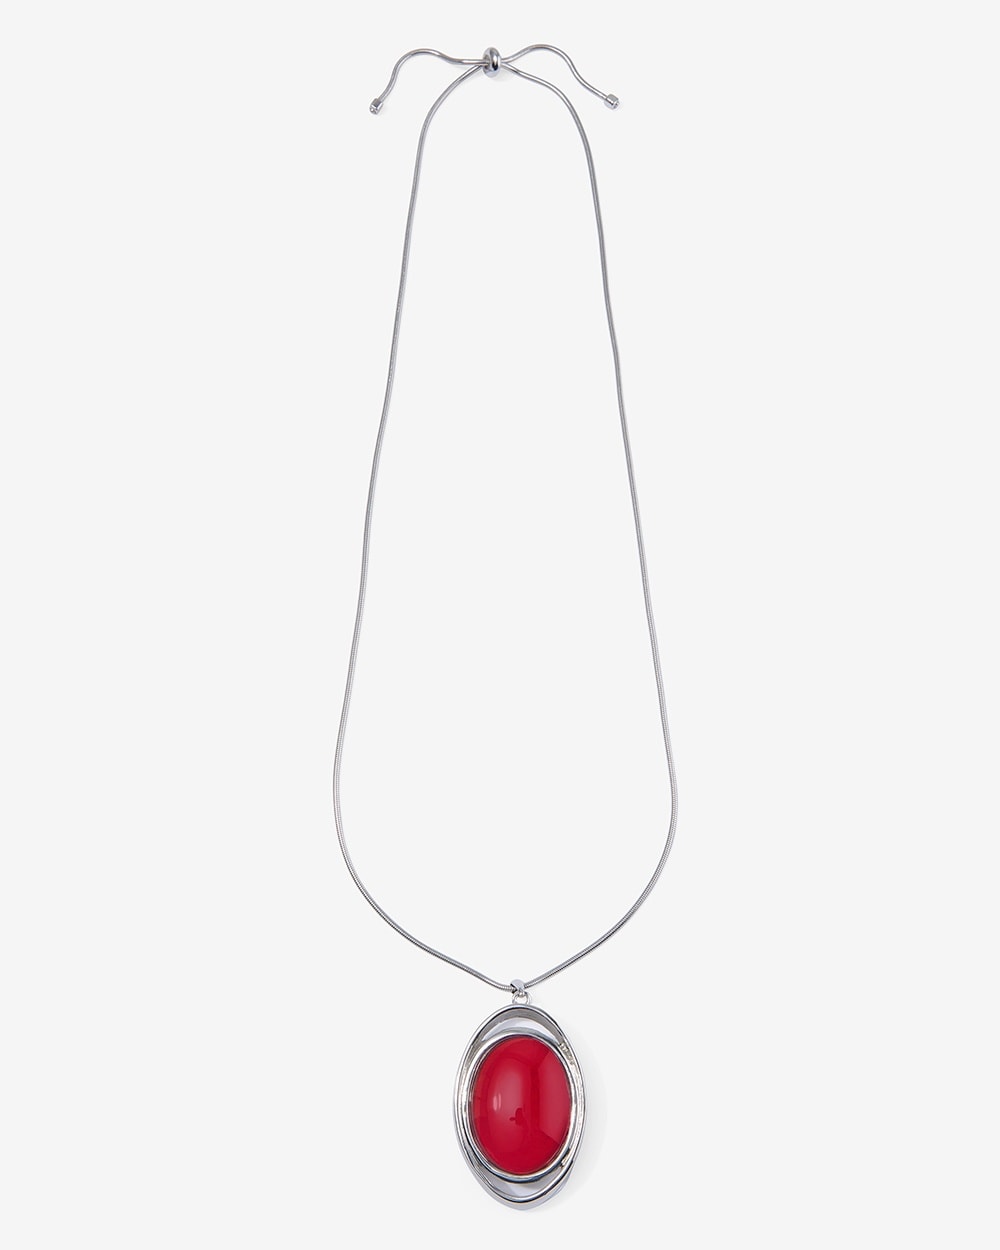 Reversible Red Pendant Adjustable Necklace